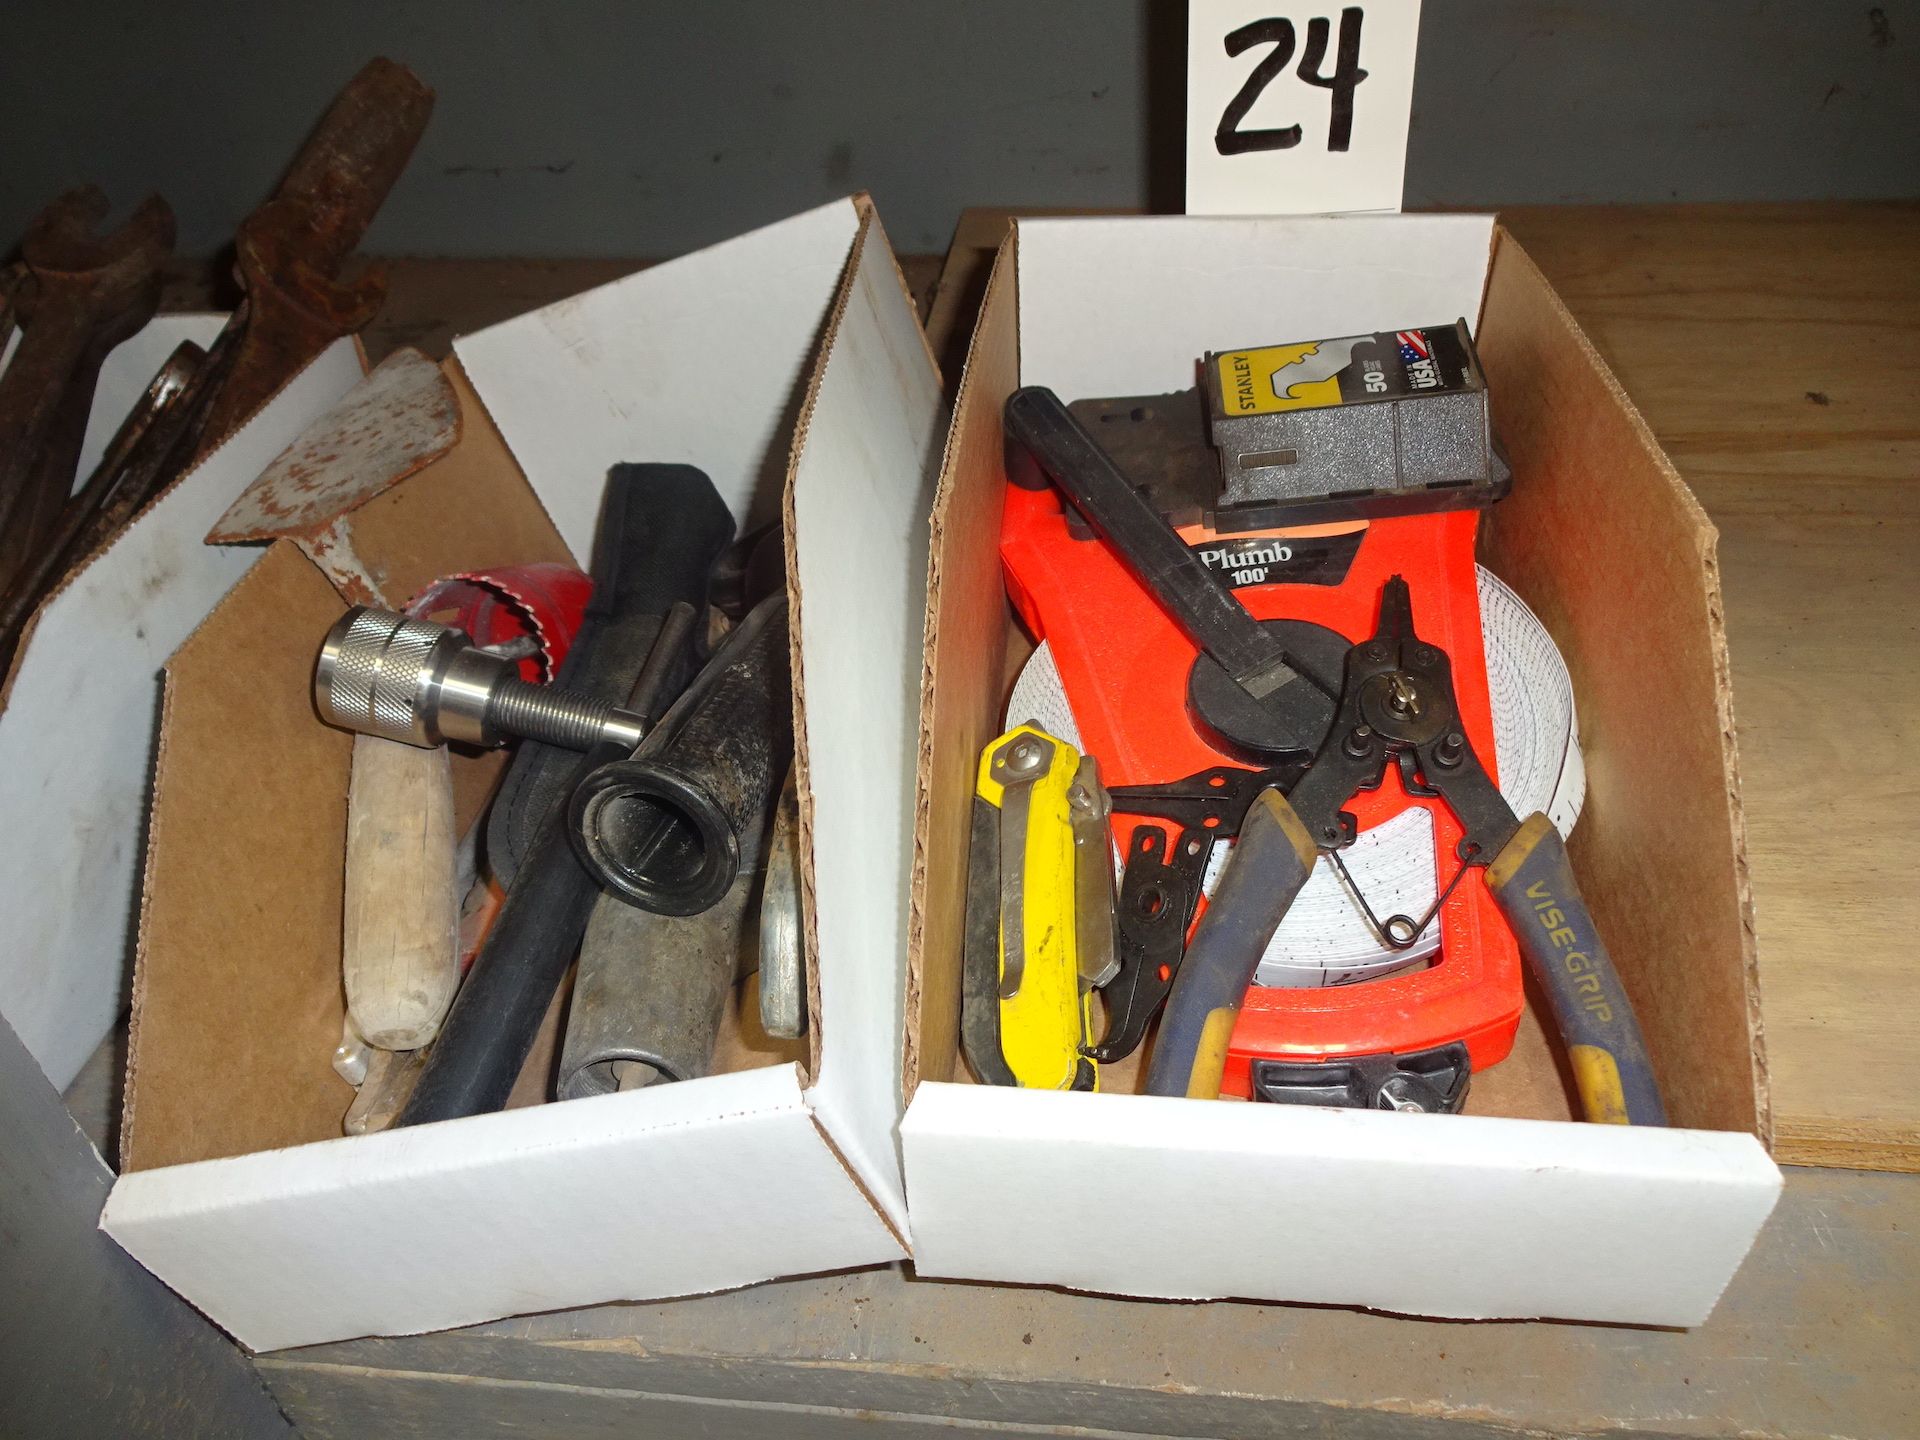 ASSORTED HAND TOOLS INCLUDING PLIERS, SCREWDRIVERS, WRENCHES & TAPE MEASURES